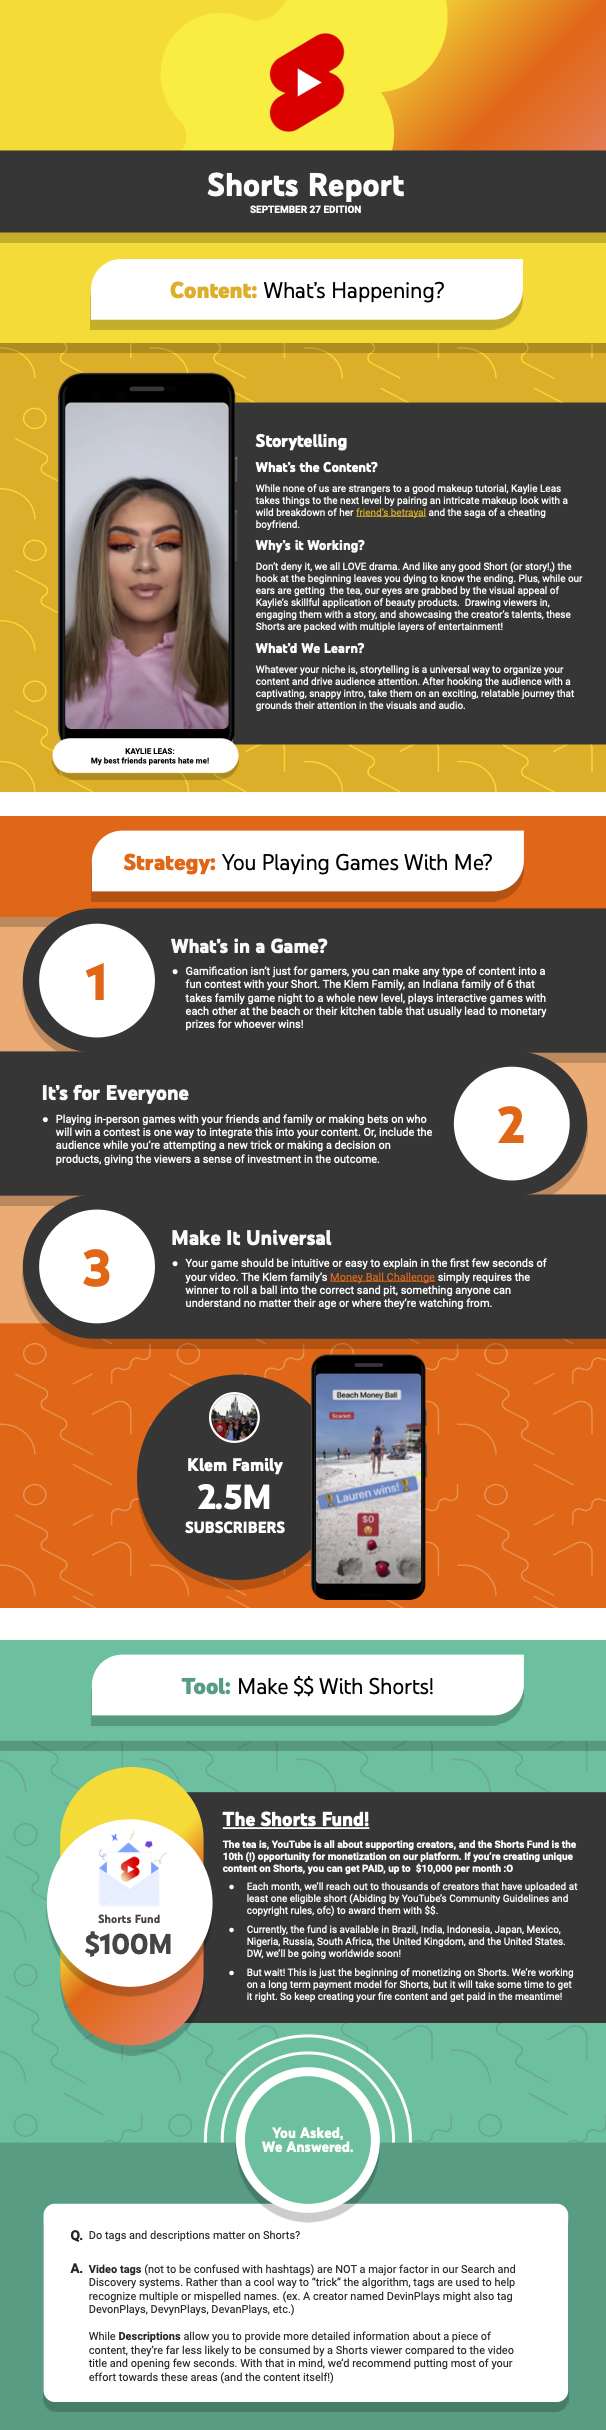 youtube publishes new shorts report to highlight key content trends and tips infographic